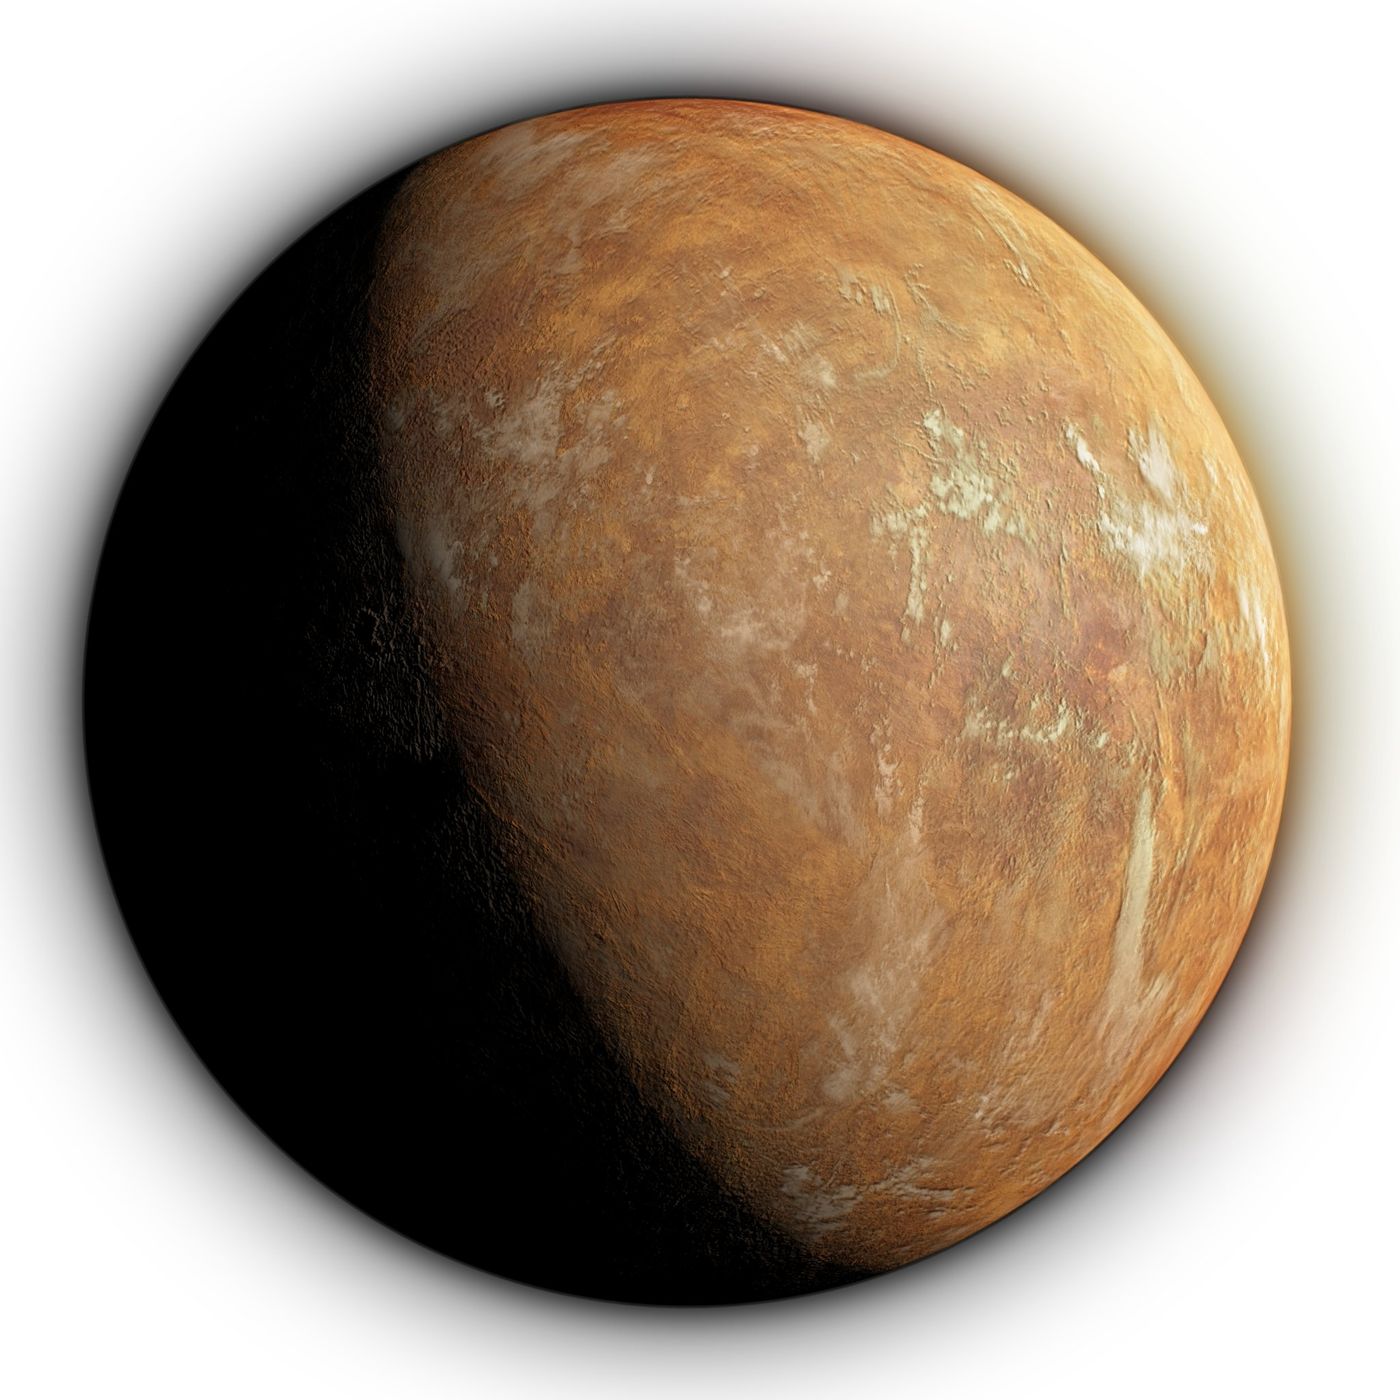 An artist's impression of what Barnard's Star b might look like.